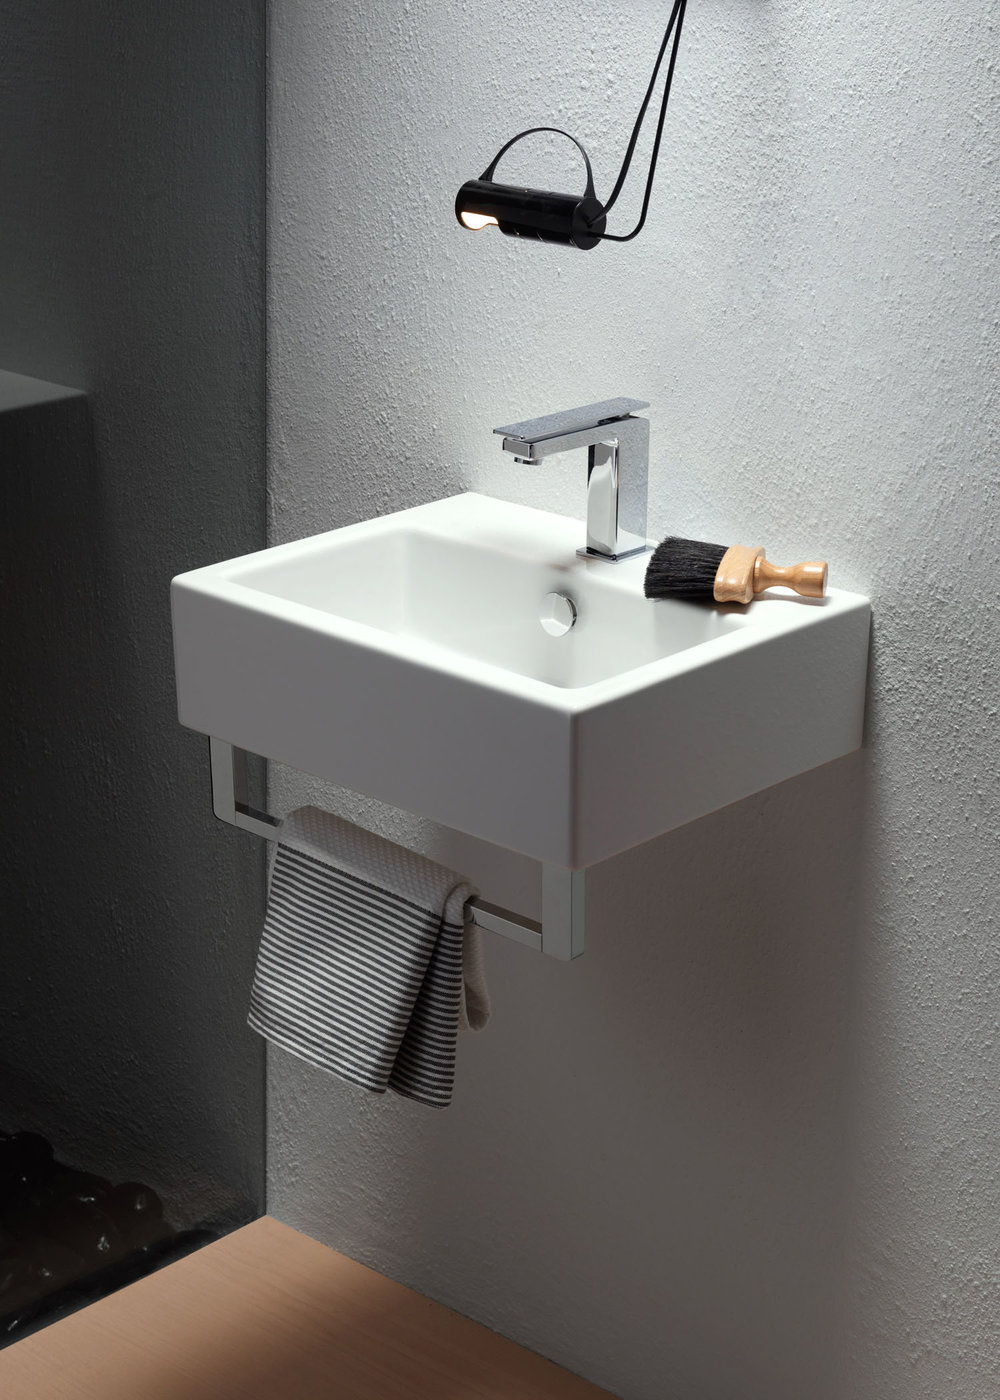 Using a Small Sink